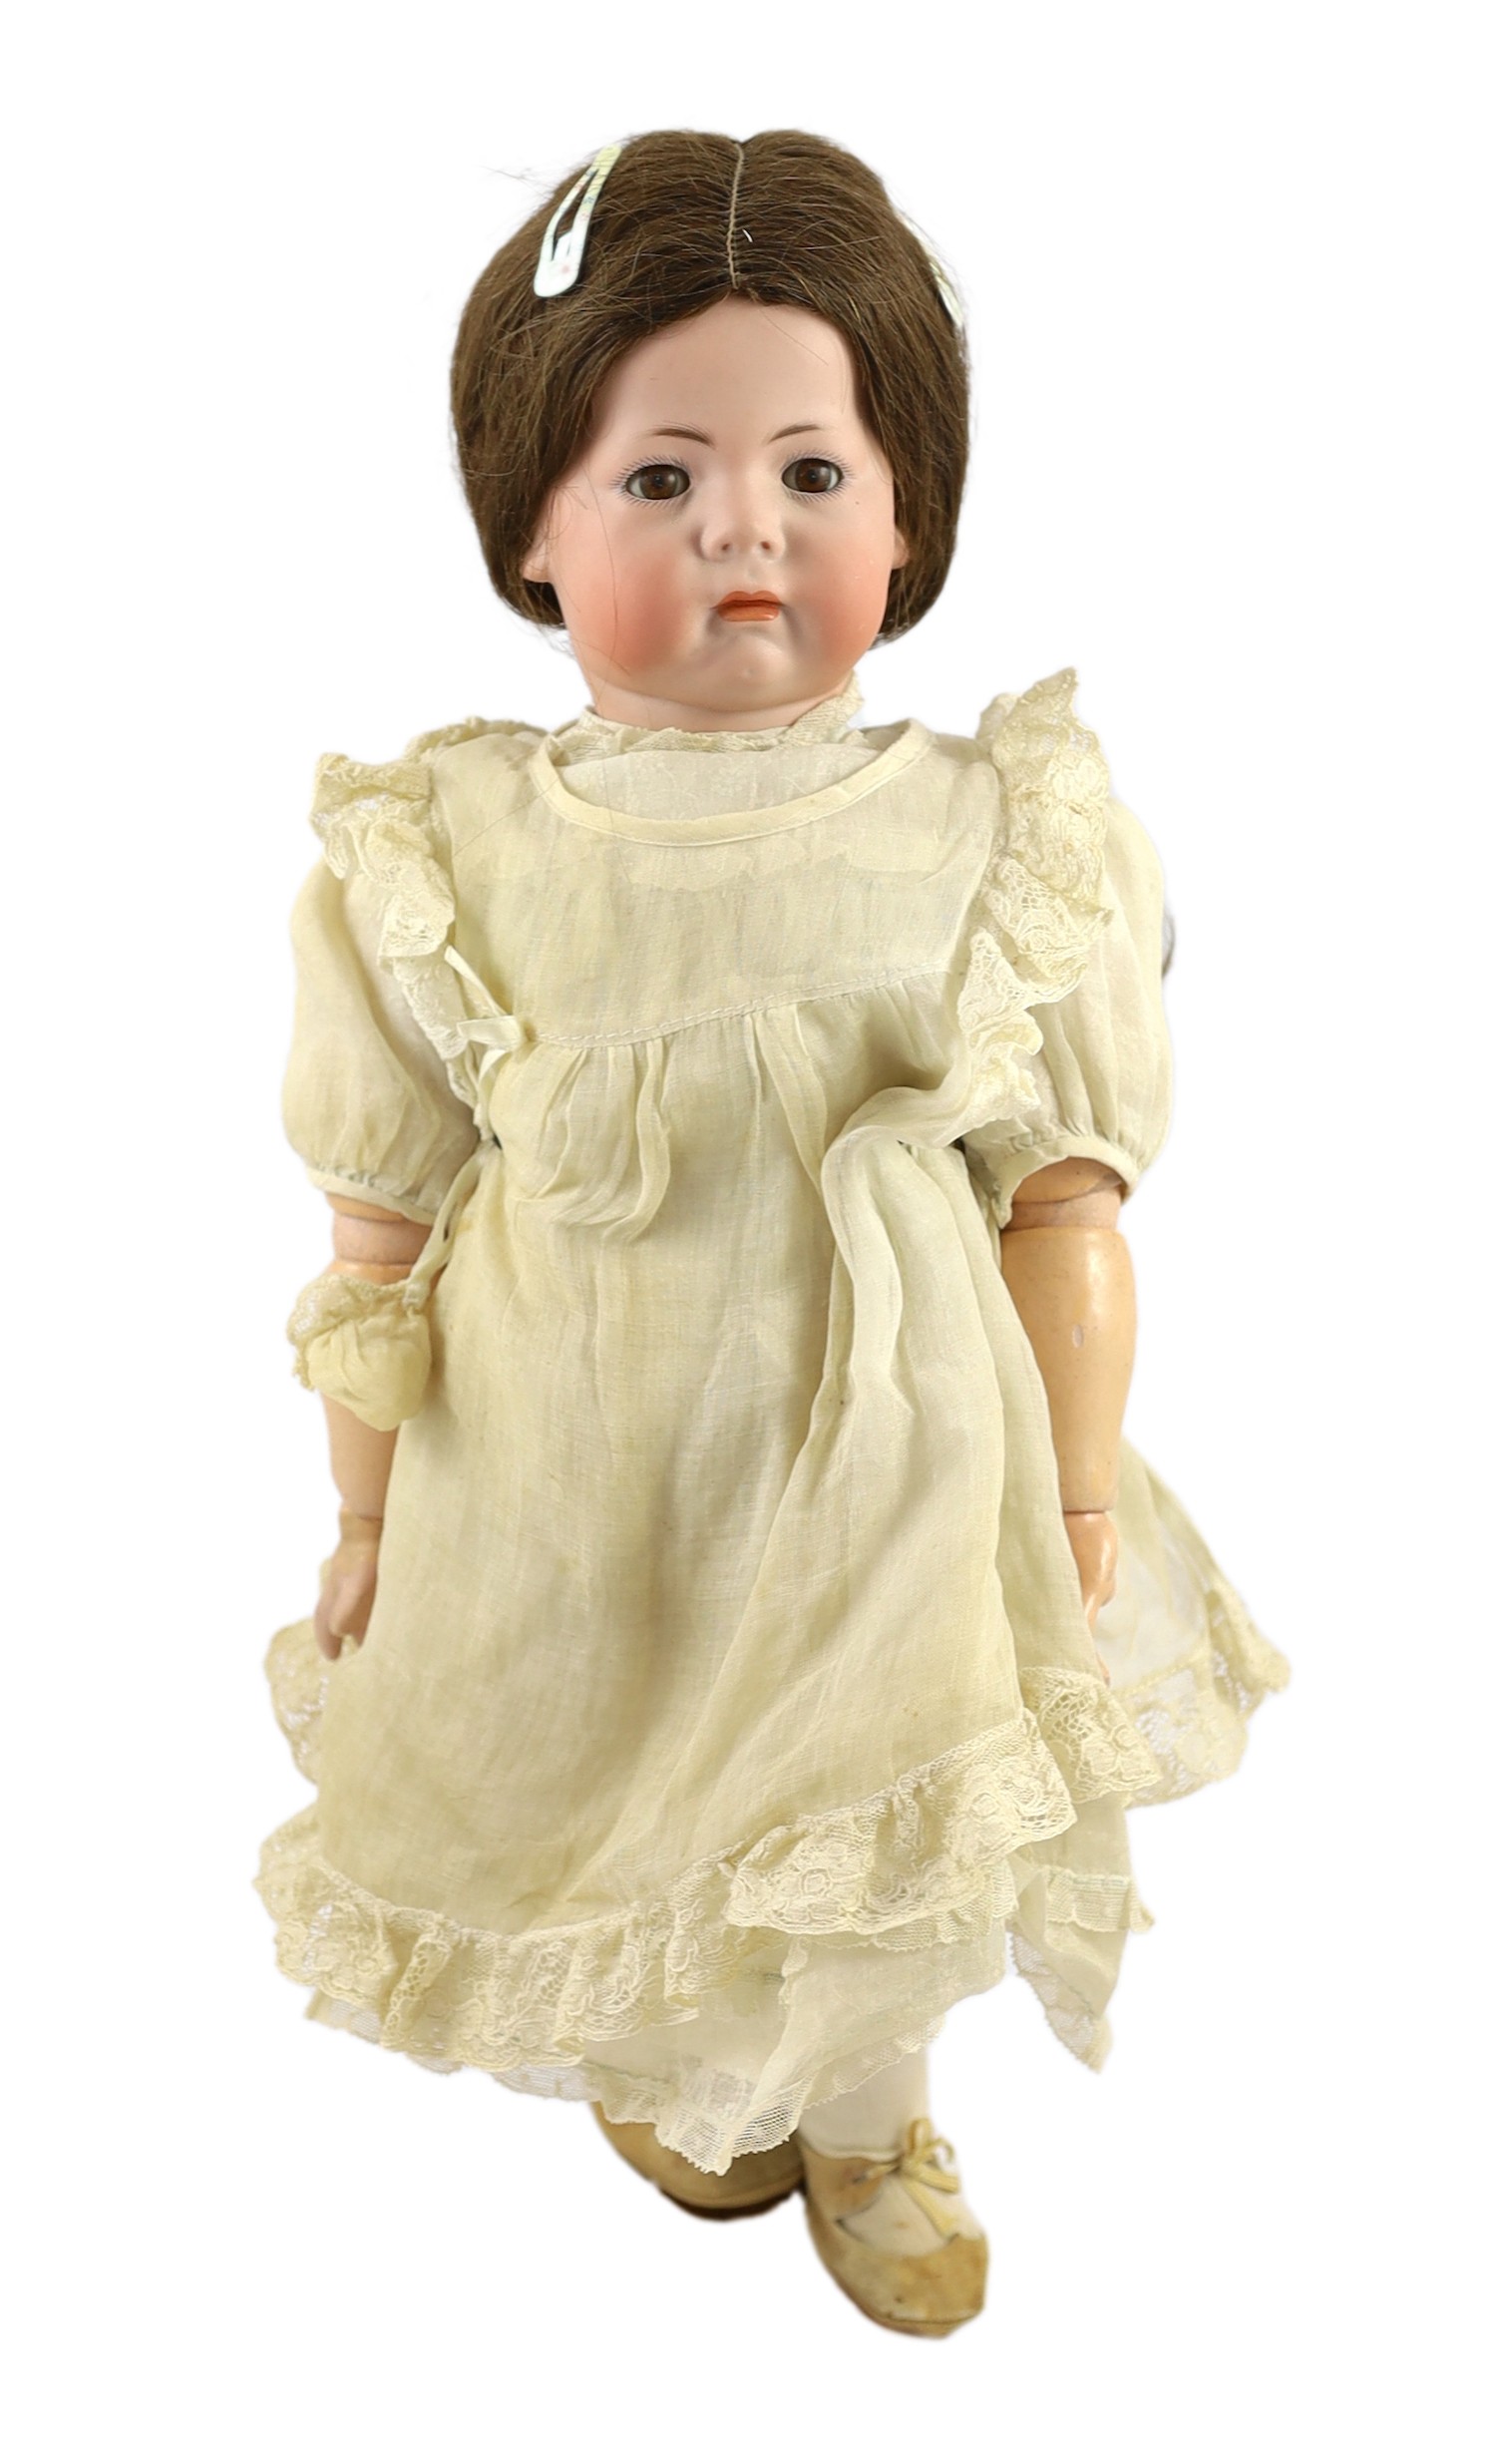 A Kammer & Reinhardt / Simon & Halbig bisque character doll, German, circa 1911, 19in.                                                                                                                                      